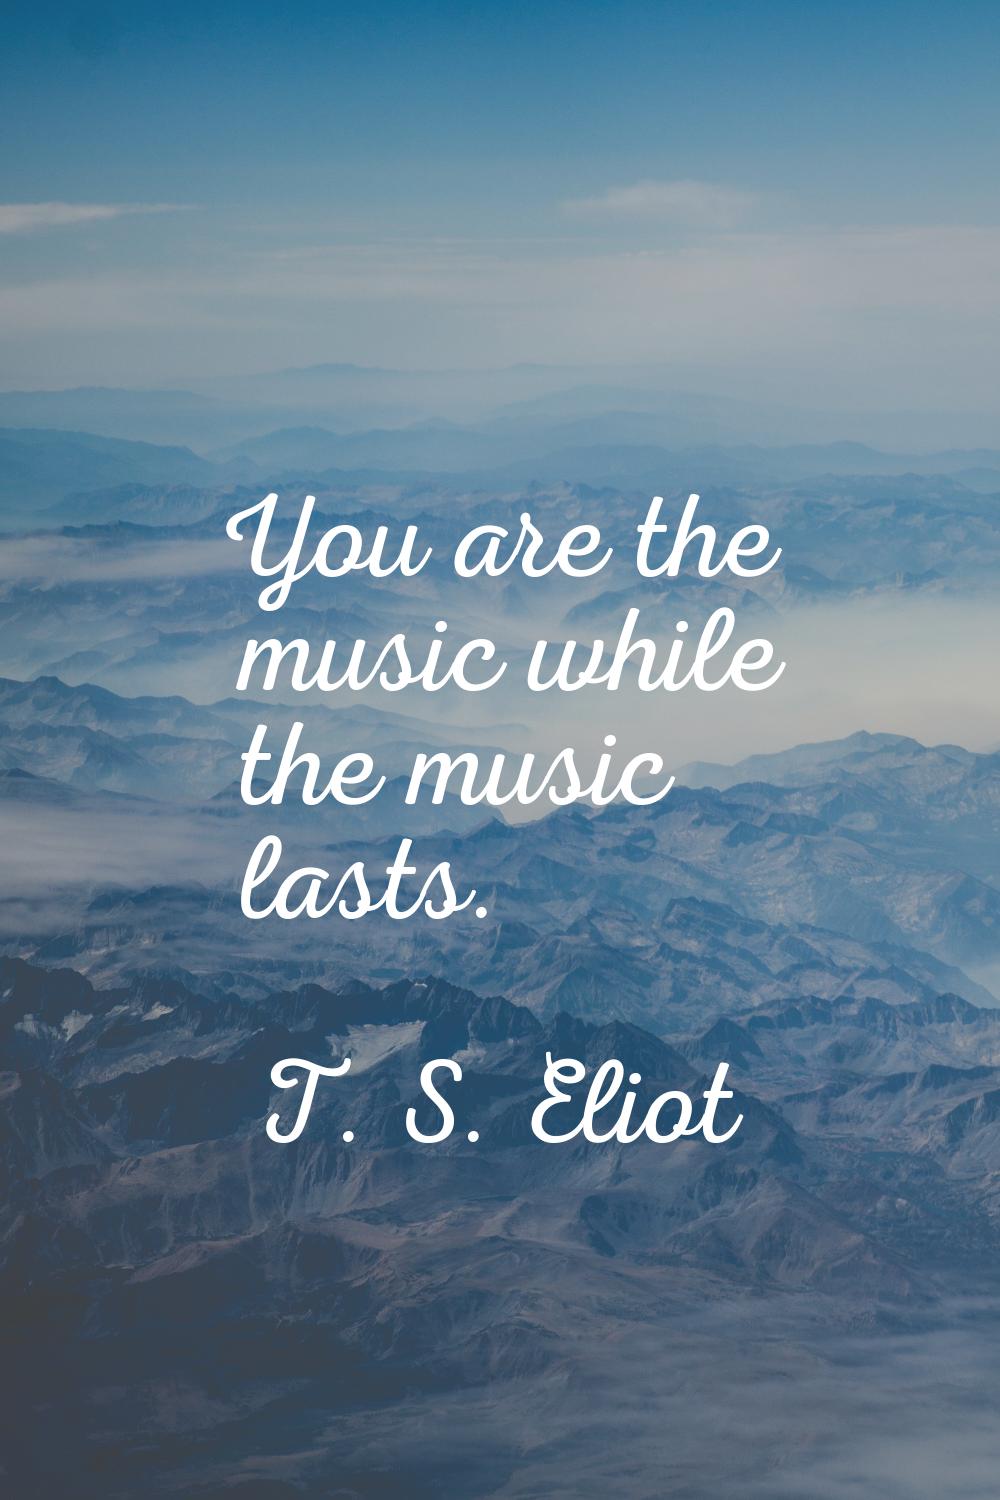 You are the music while the music lasts.